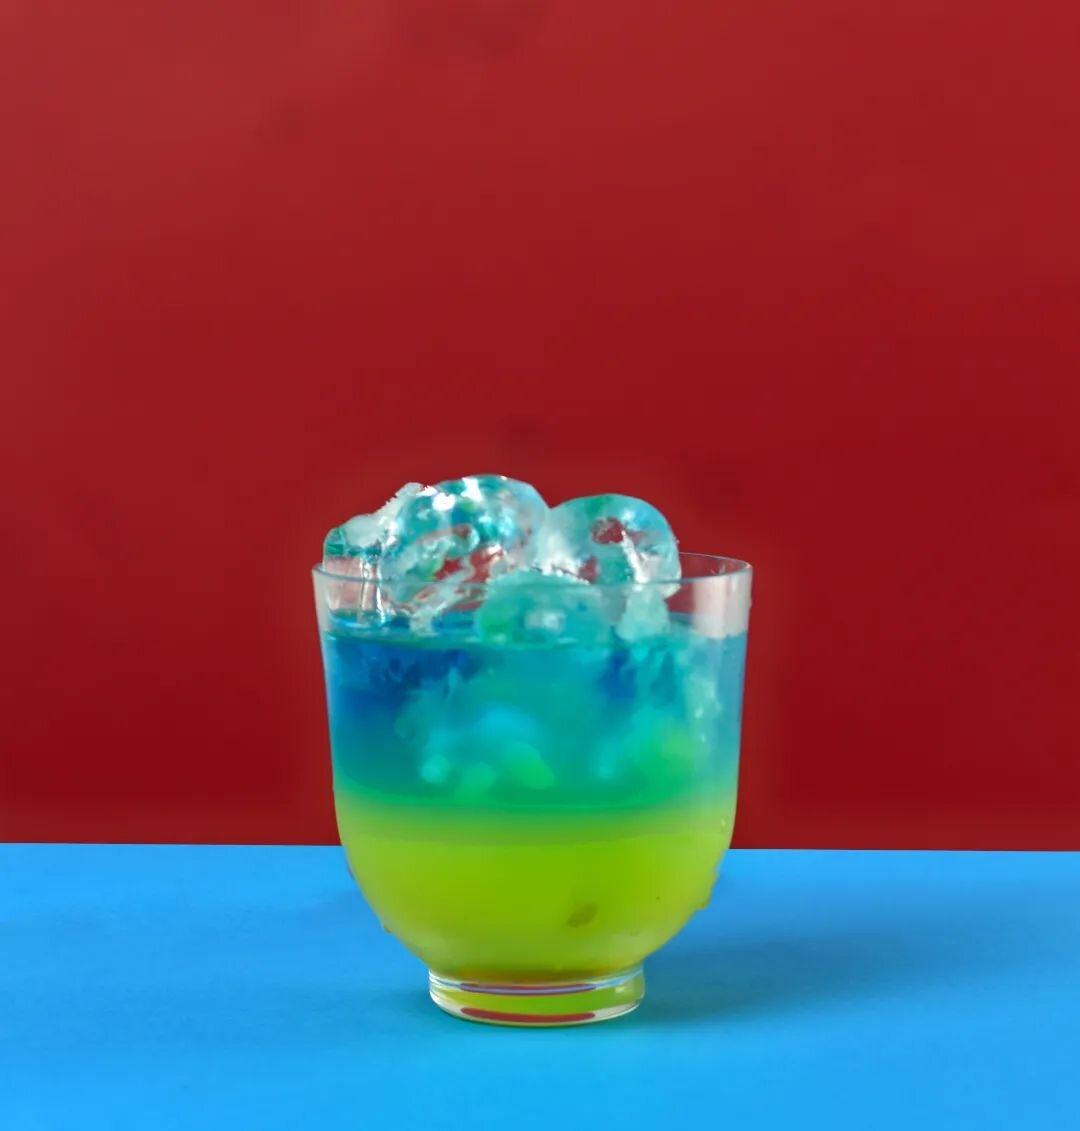 30 MINUTES TILL EUROVISION! Who's going to win? Place your bets below, winner gets nothing.

Here's a throwback to the eurovision Ukraine cocktail I shared the other day with @flavarspirit 

Don't forget, the UK may be hosting it but that doesn't mea